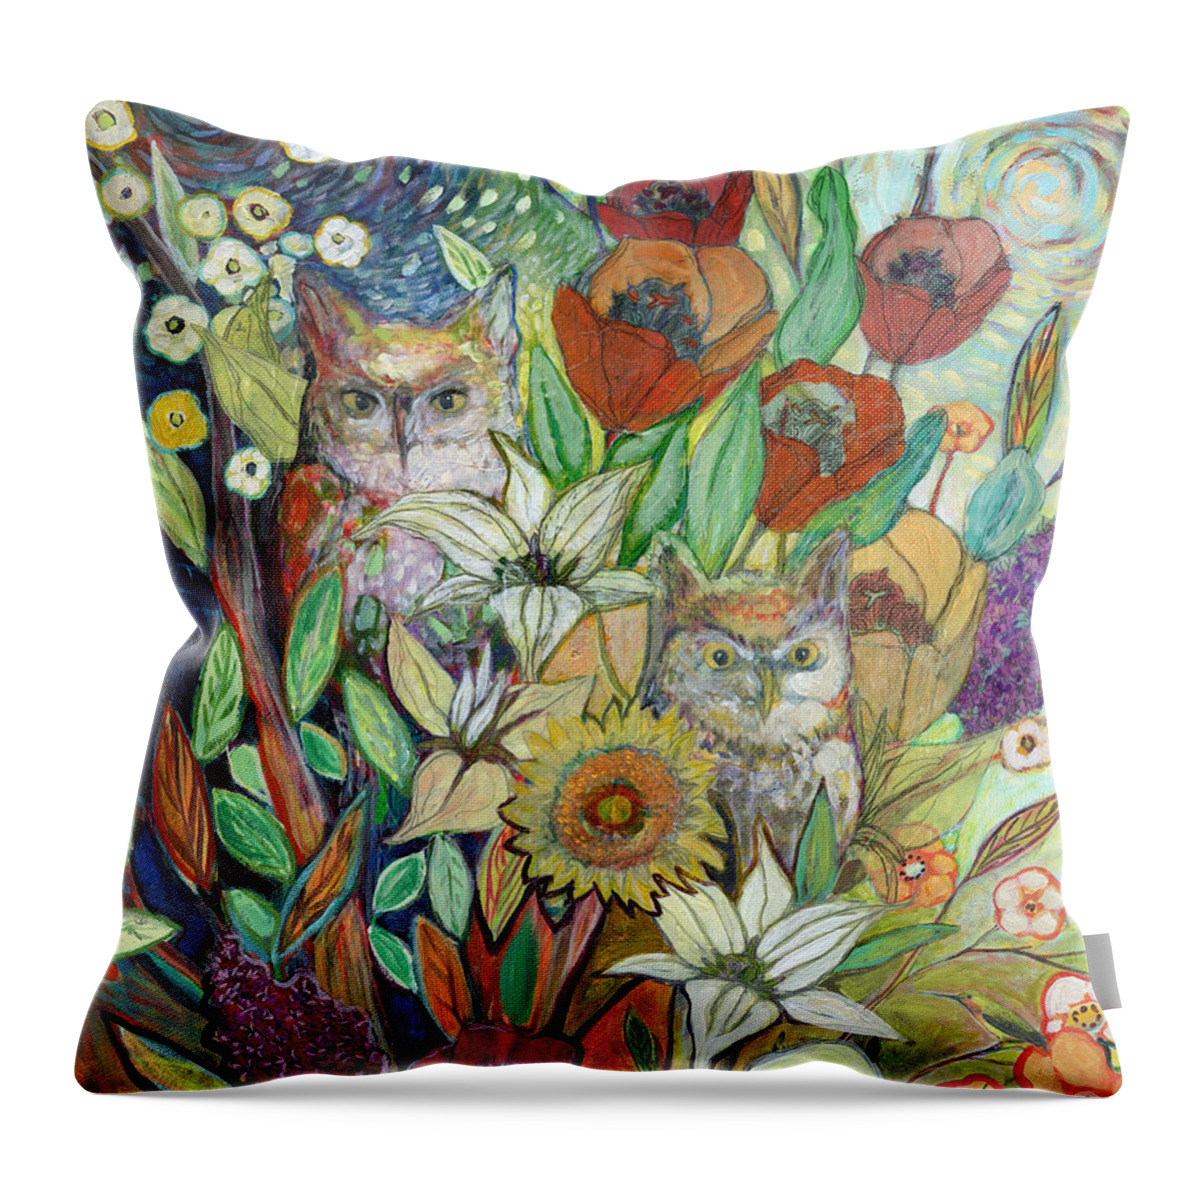 Owl Throw Pillow featuring the painting Returning Home to Roost by Jennifer Lommers